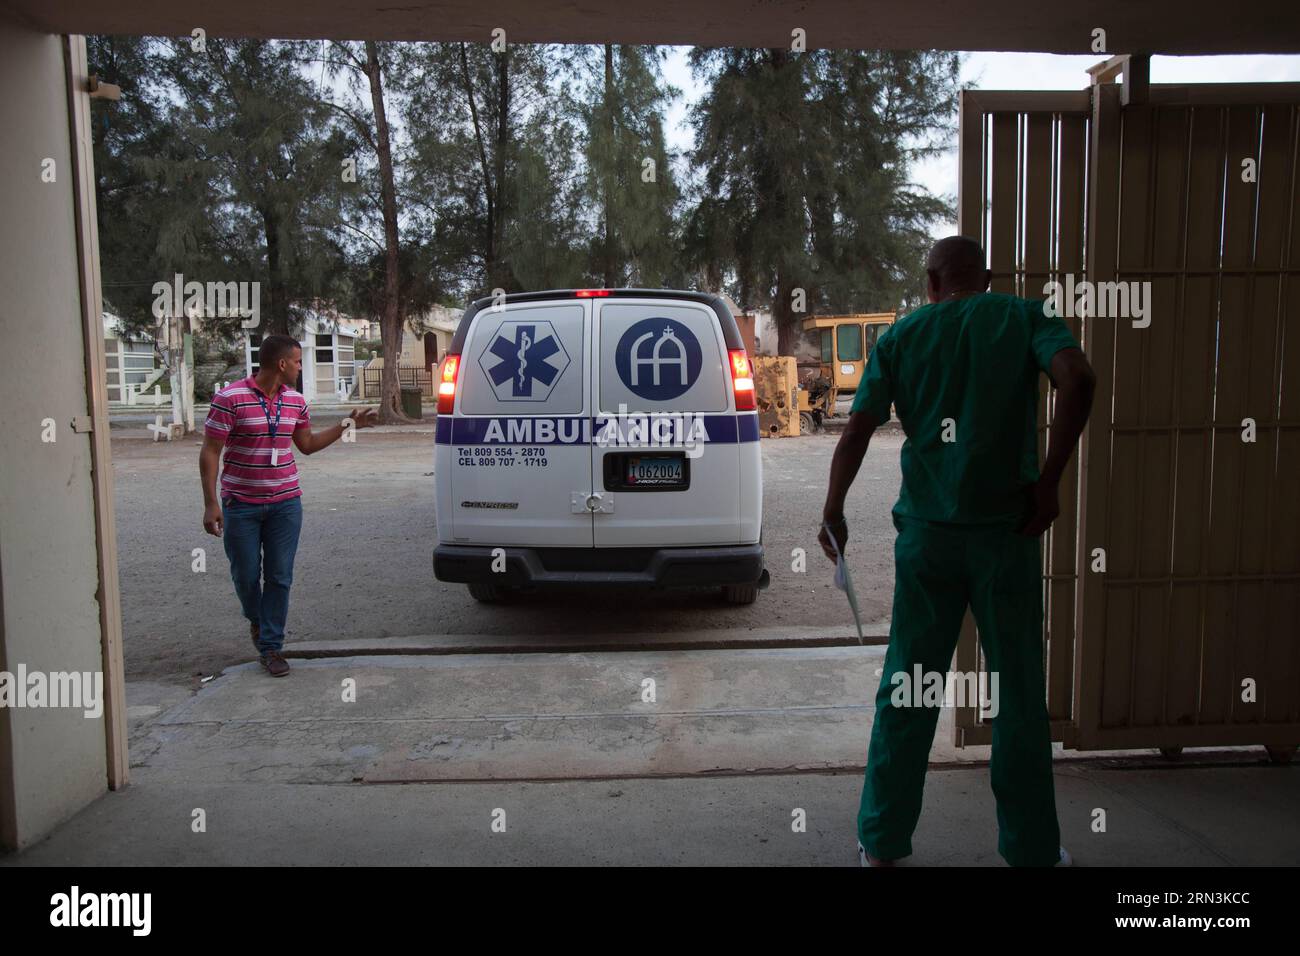 (150421) -- SANTO DOMINGO, April 20, 2015 -- The vehicle that moves the bodies of the victims of a plane accident, enters the Pathology Center of the Cristo Redentor Cementery, in Santo Domingo, Dominican Republic, on April 20, 2015. Four Spanish and two British tourists died in the accident of a plane that occurred on Monday in Dominican Republic, local authorities confirmed. The accident happened after 08:00, local hour, when the type PA-32 plane, registration number HI-957, precipitated to the ground and caught fire, close to a residential zone of the touristic locality of Punta Cana, leavi Stock Photo